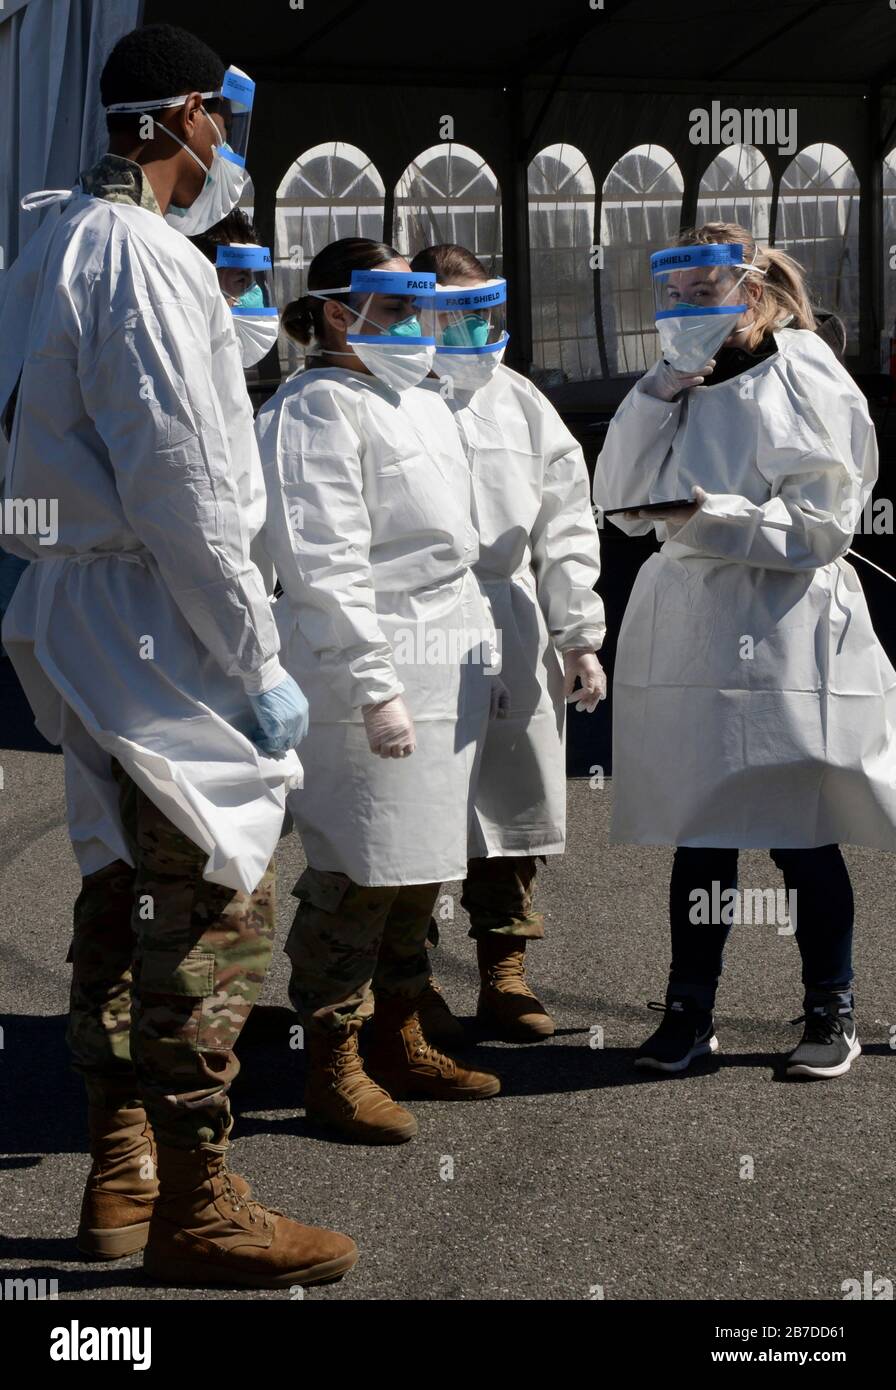 New Rochelle, USA. 14th Mar, 2020. U.S. National Guard members are briefed by a New York State Department of Health administrators on safety protocols after being called up to assist in battling the COVID-19, coronavirus outbreak March 14, 2020 in New Rochelle, New York. Credit: Sean Madden/Planetpix/Alamy Live News Credit: Planetpix/Alamy Live News Stock Photo